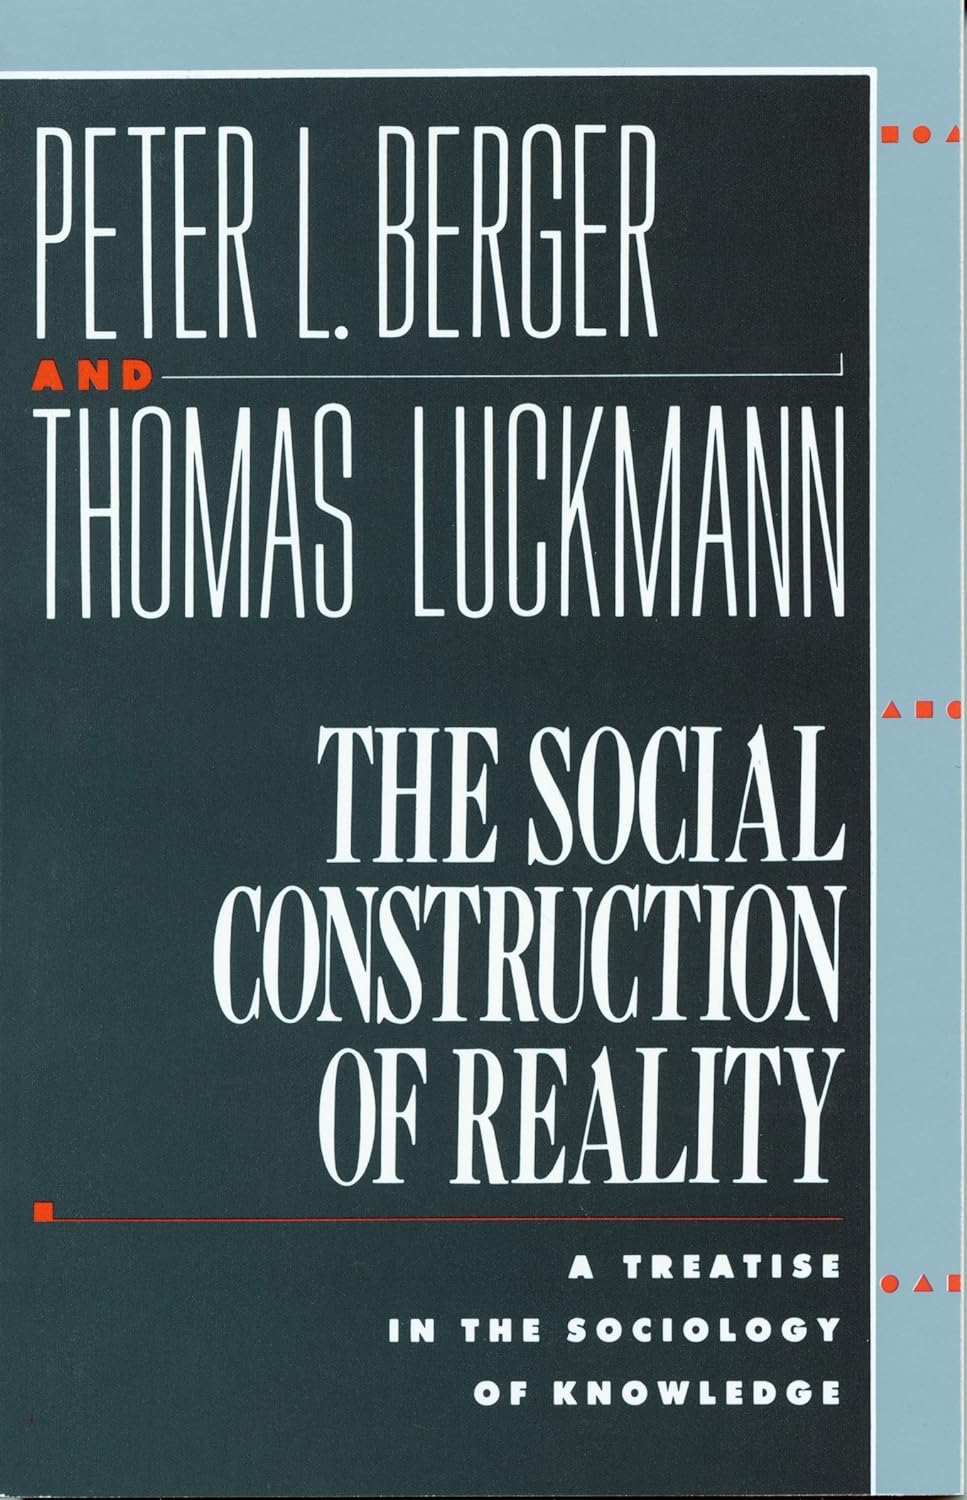 Book cover. Peter L Berger and Thomas Luckman; The Social Construction of Reality; A treatise in the Sociology of Knowledge